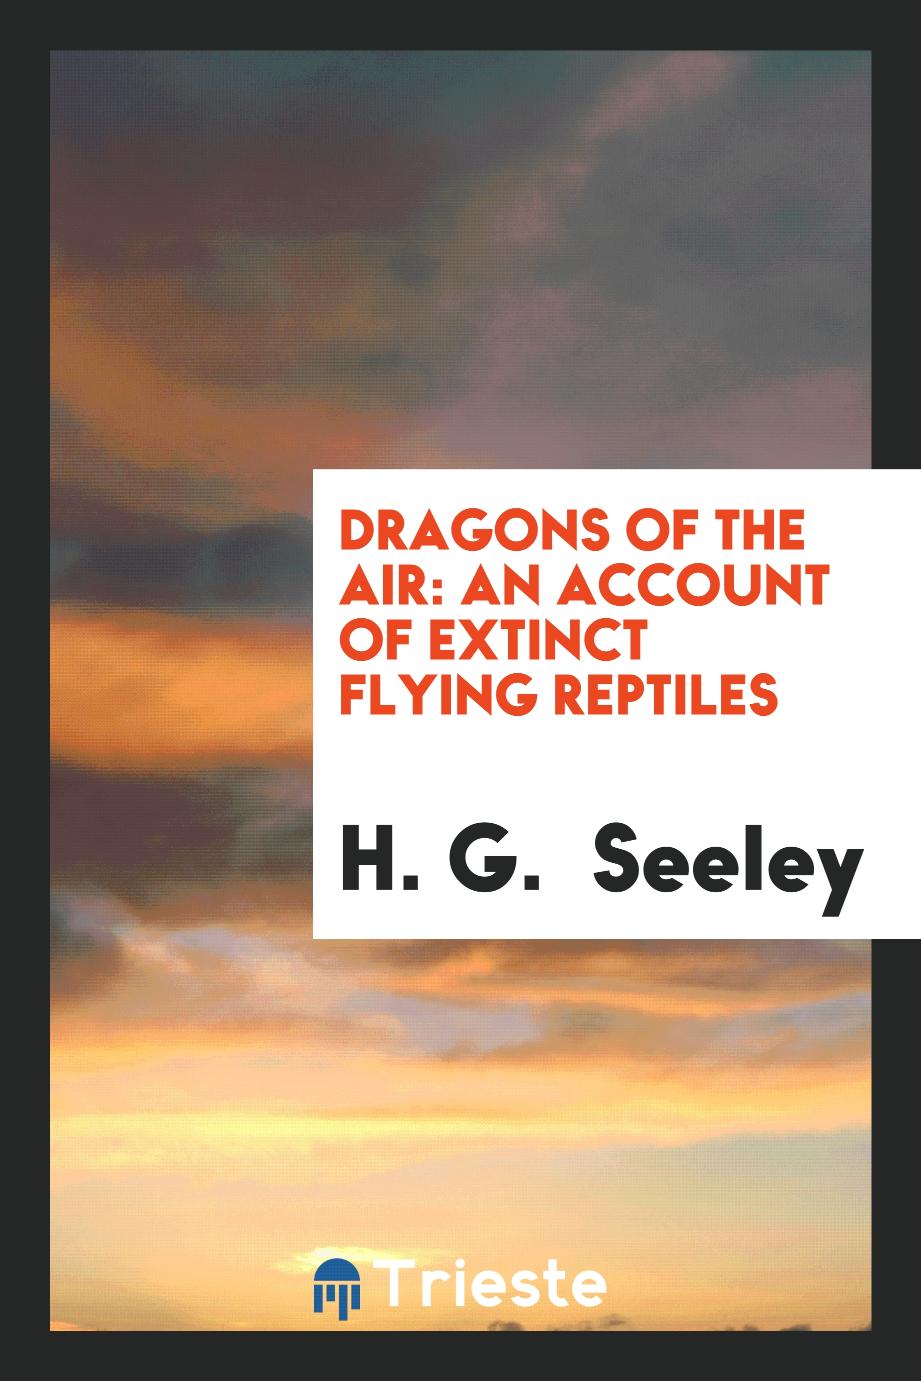 Dragons of the air: an account of extinct flying reptiles